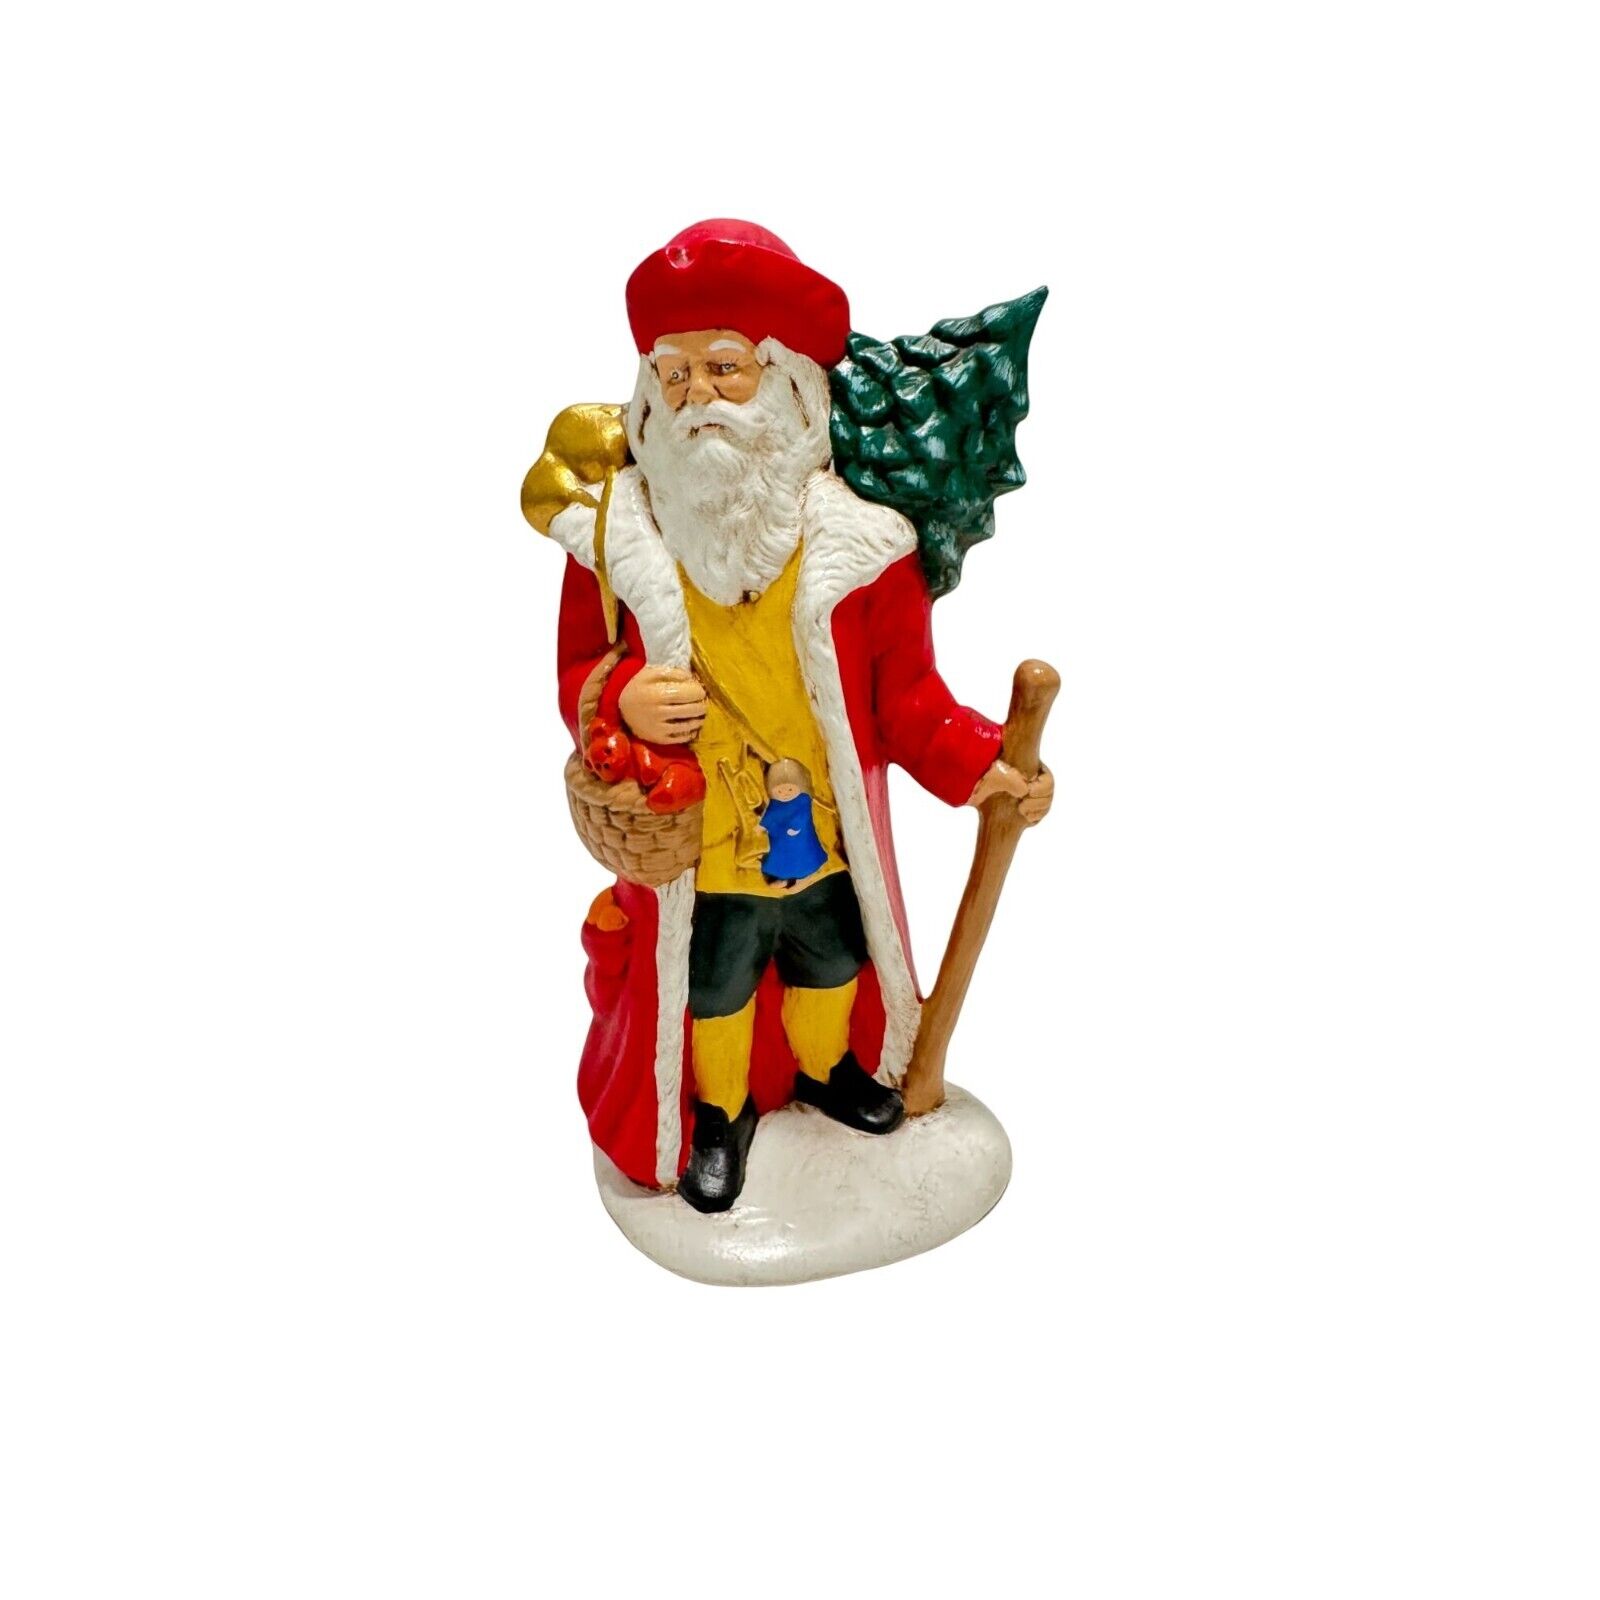 Vtg Ceramic Old World Colonial Santa With Tree and Toys Hand Painted Christmas